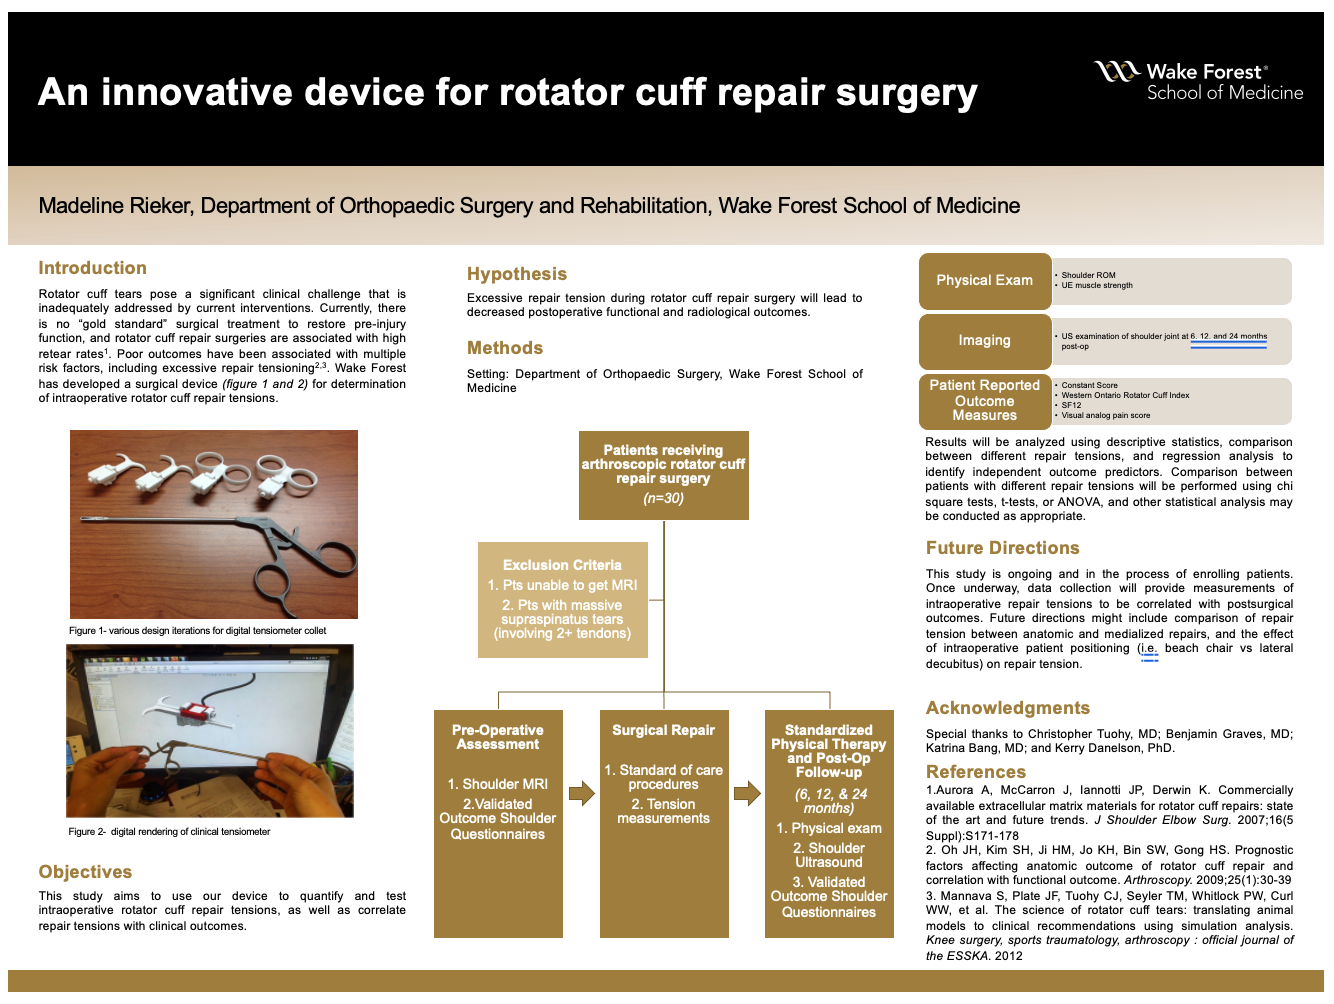 Showcase Image for An innovative device for rotator cuff repair surgery